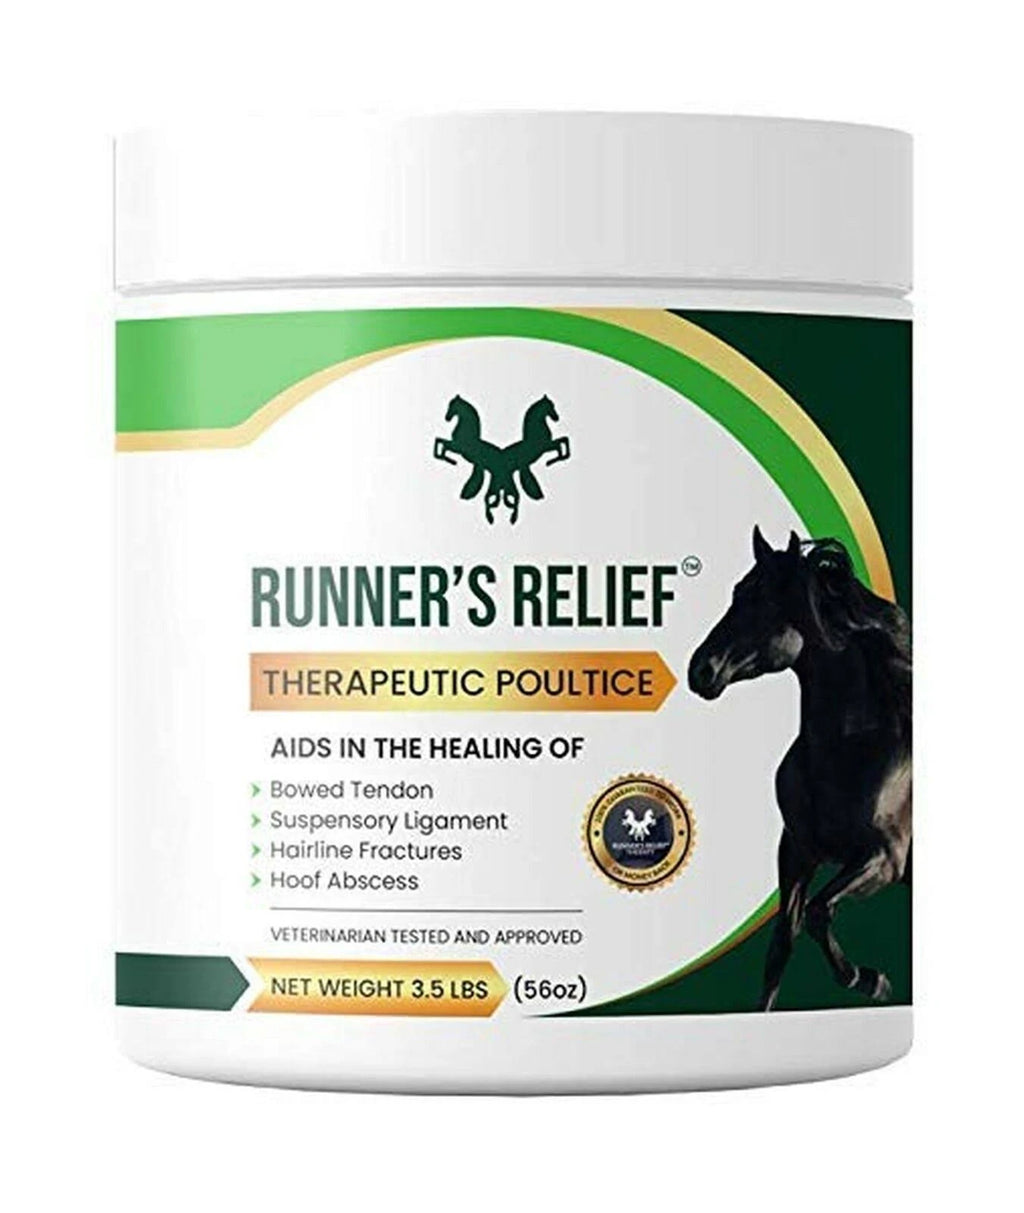 Runner's Relief Therapeutic Poultice 3.5lb